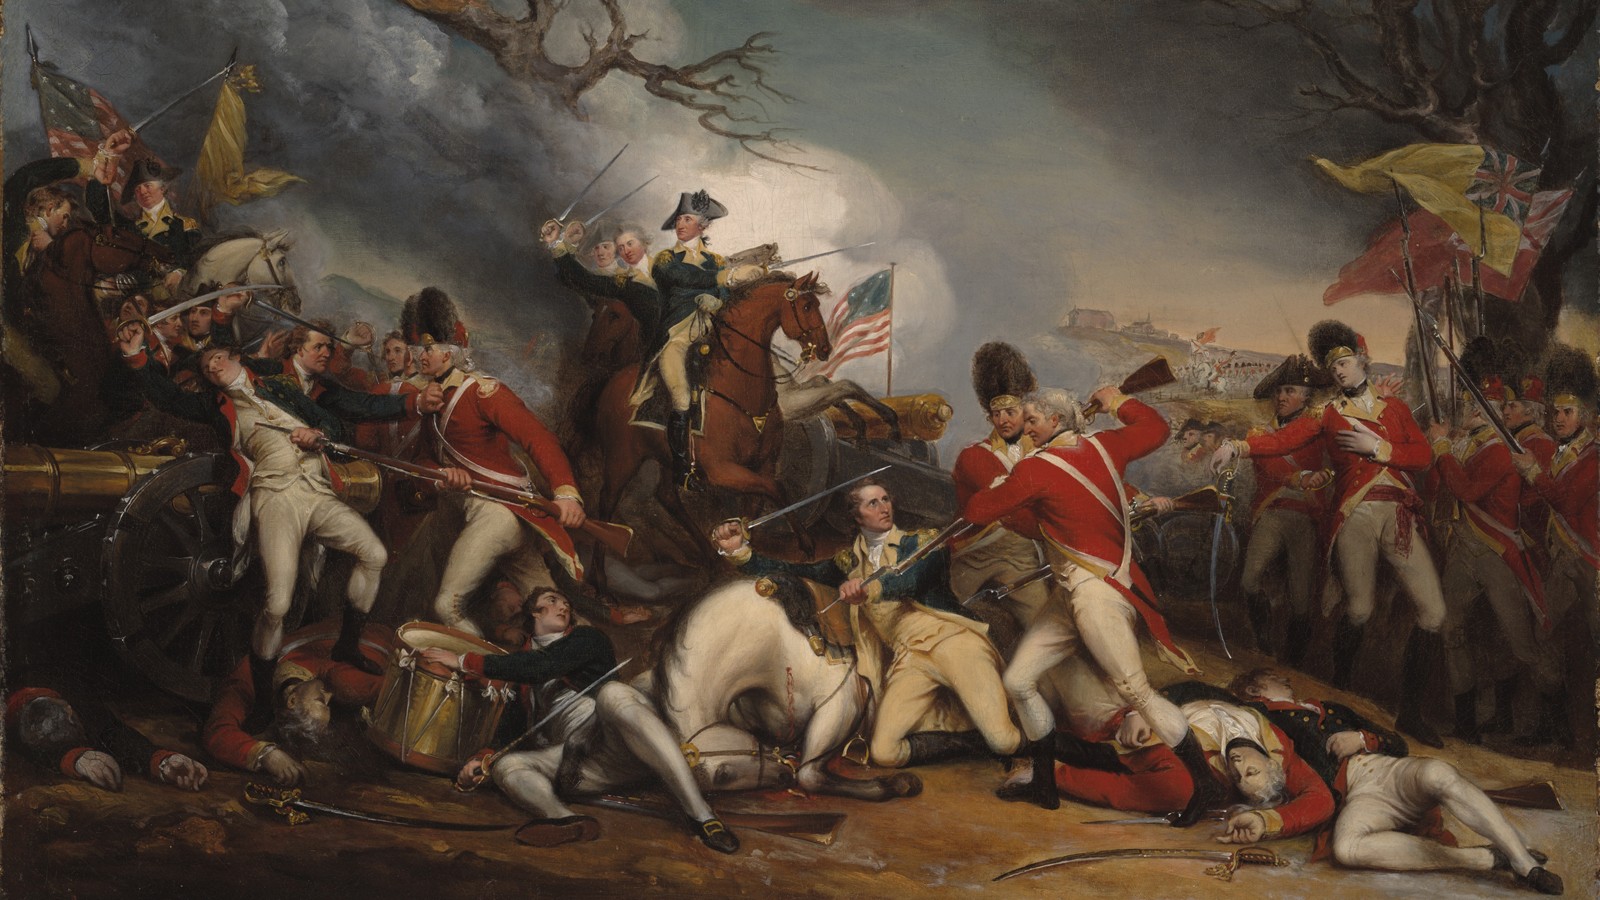 The Death of General Mercer at the Battle of Princeton, January 3, 1777 by John Trumbull